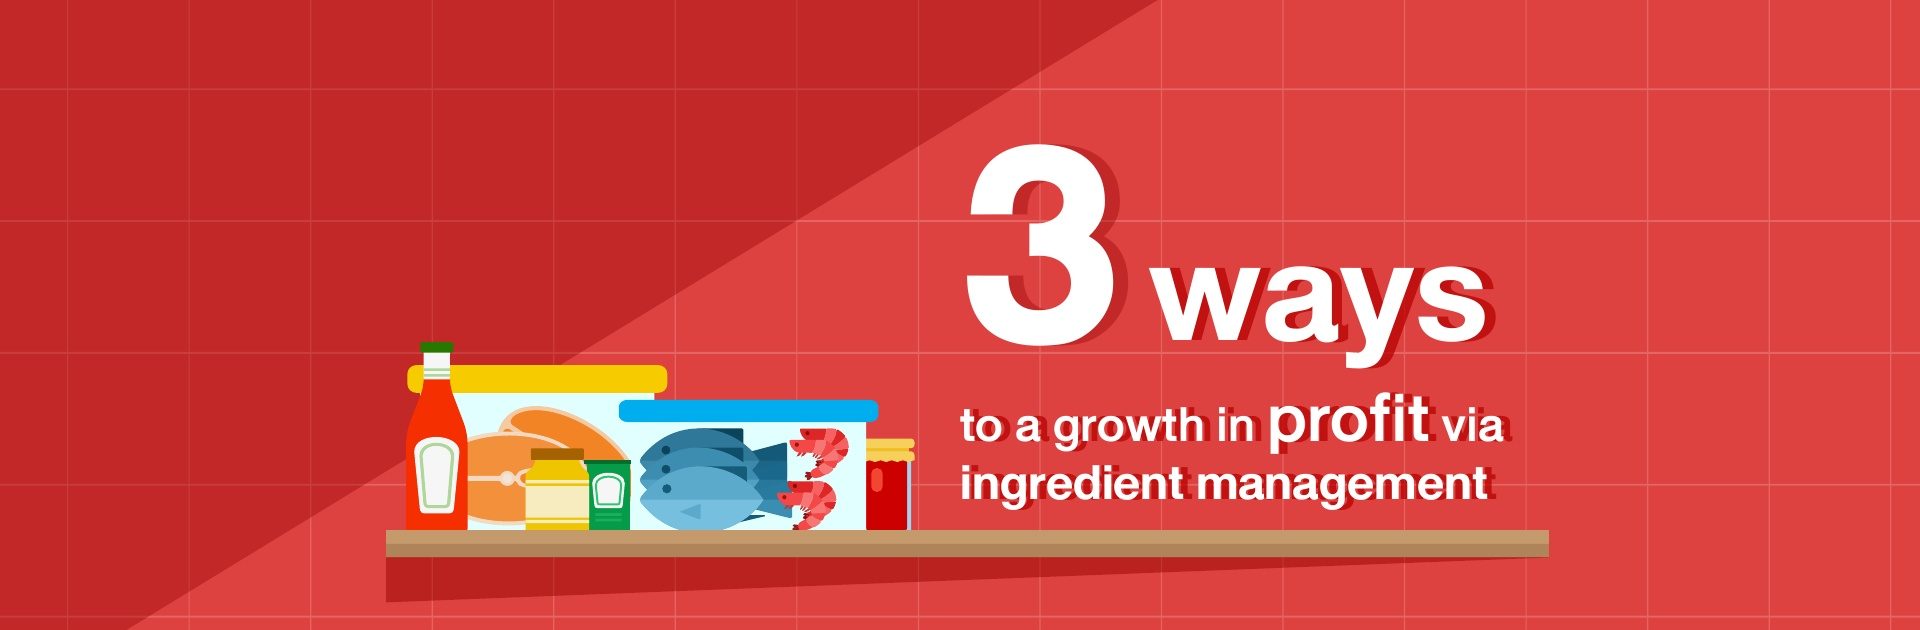 Managing ingredients well is one way to increase profit